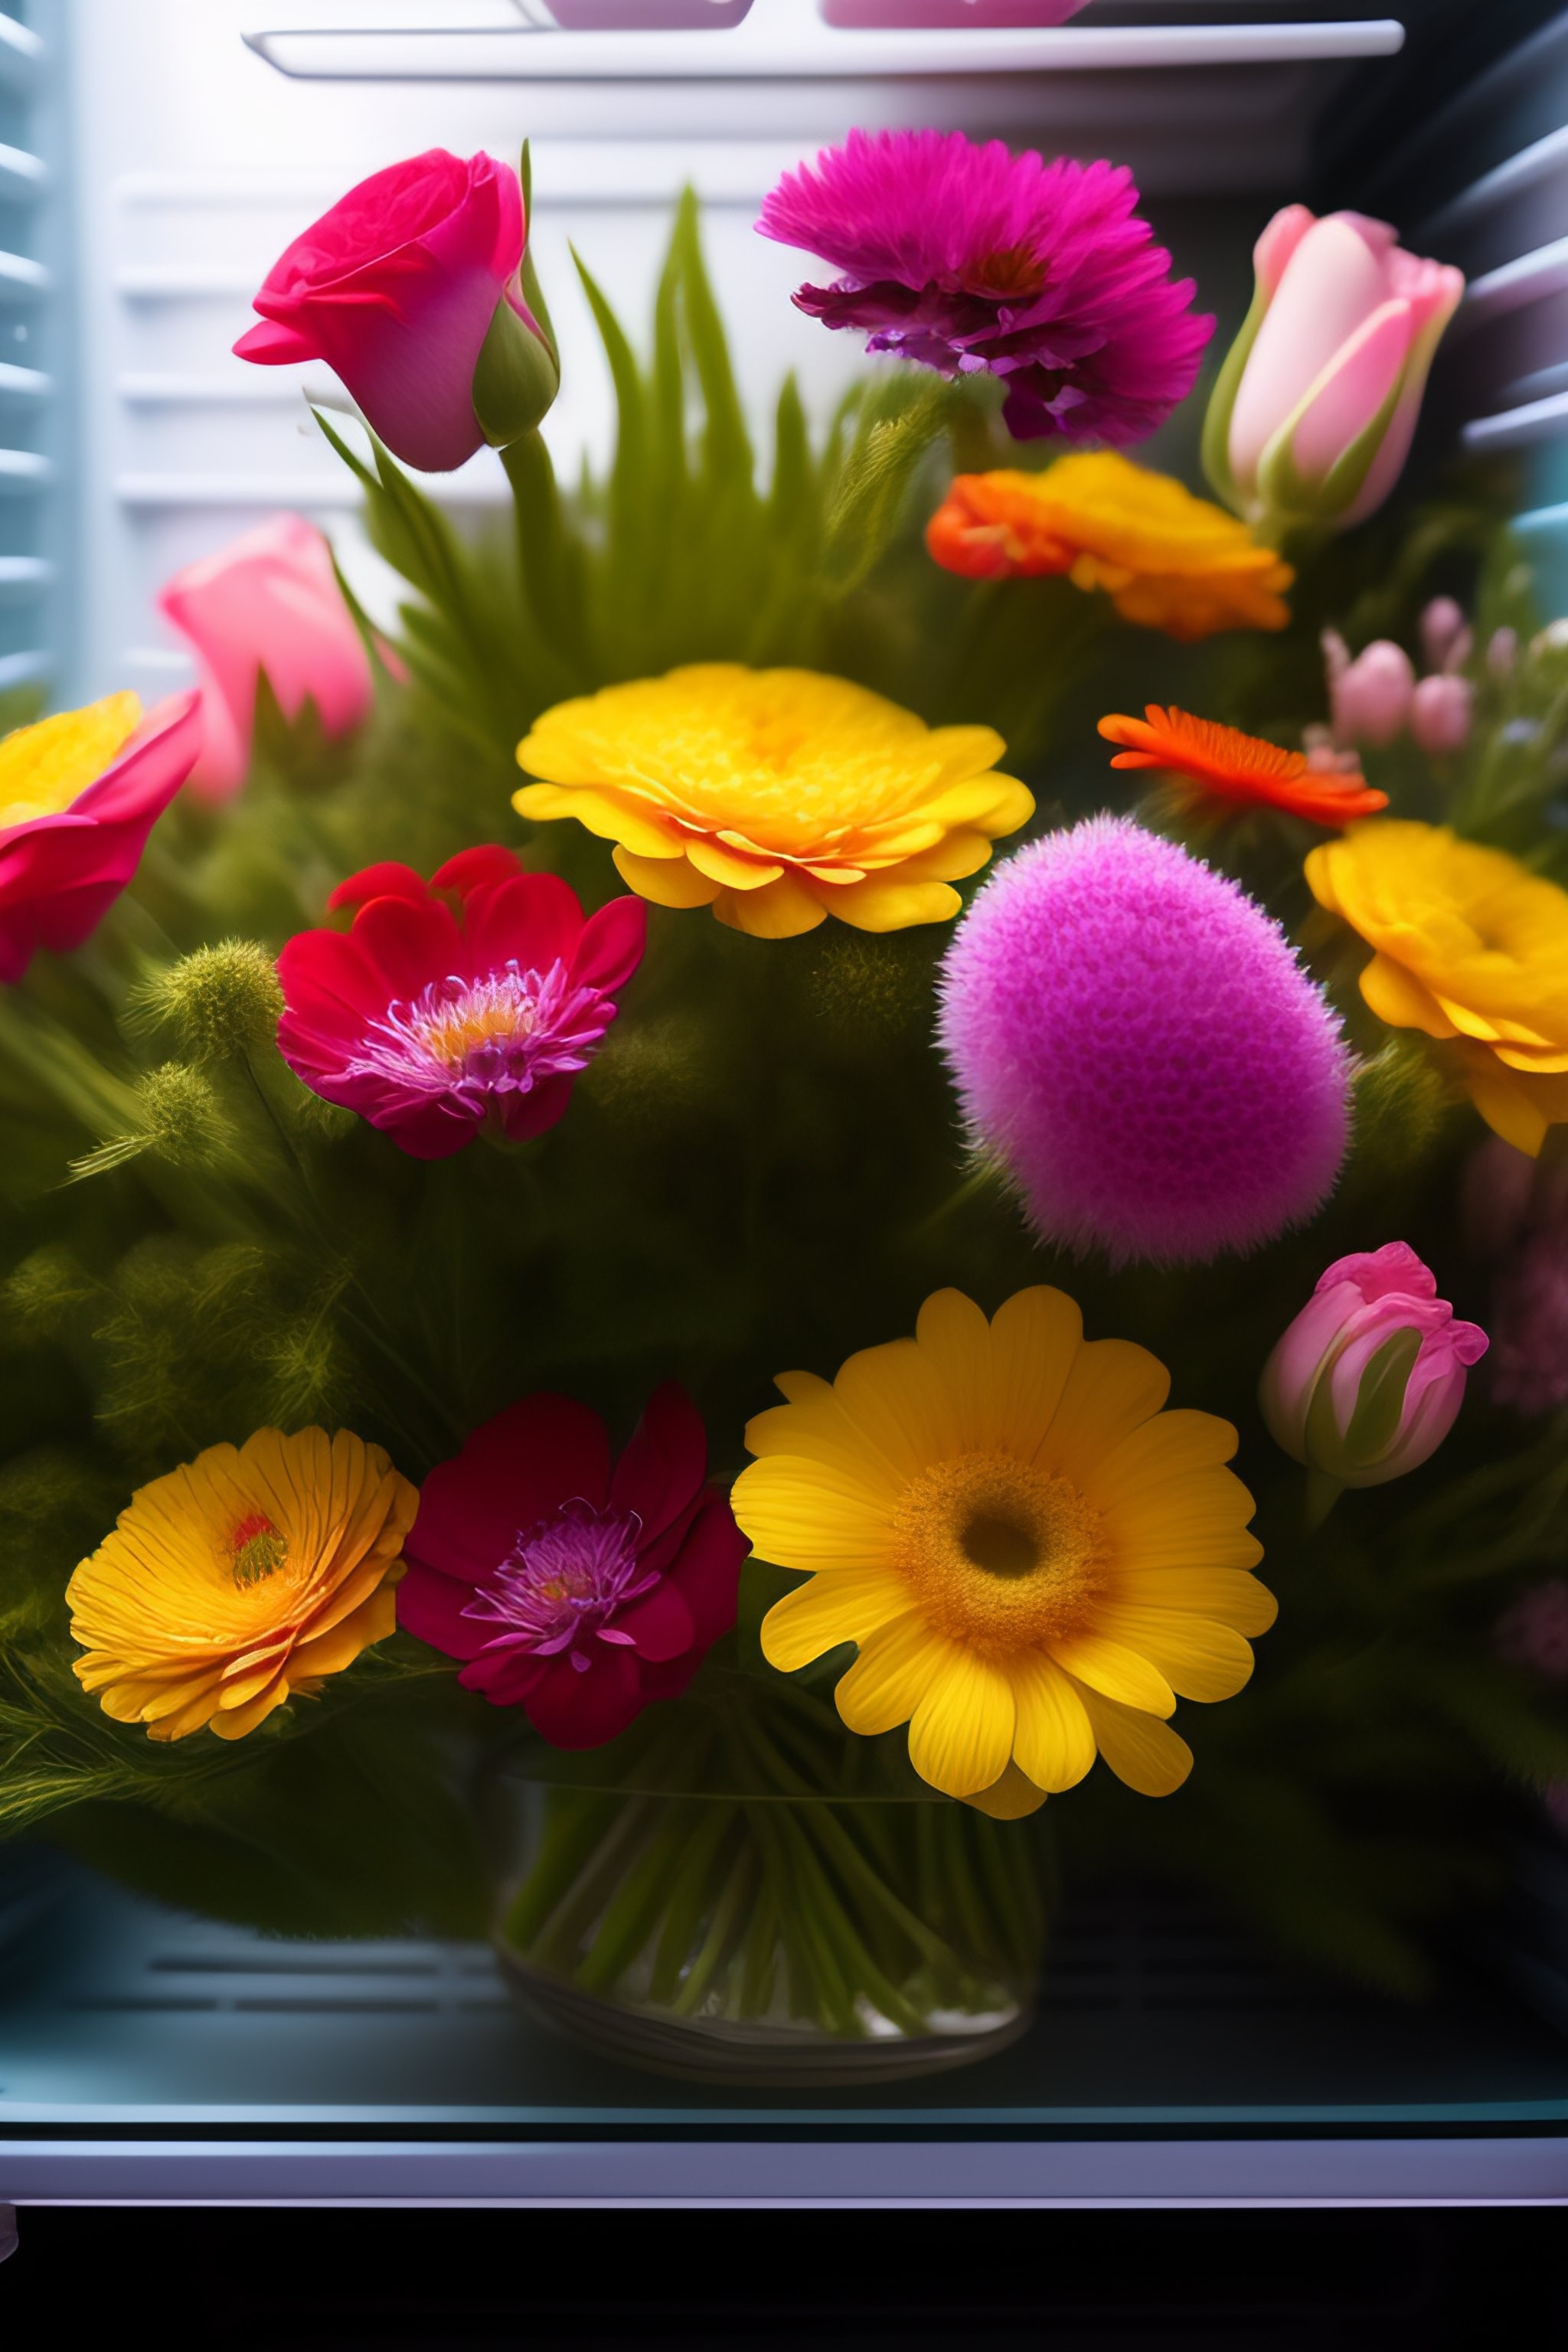 Brightly Colored Flowers to Celebrate Your Life Together